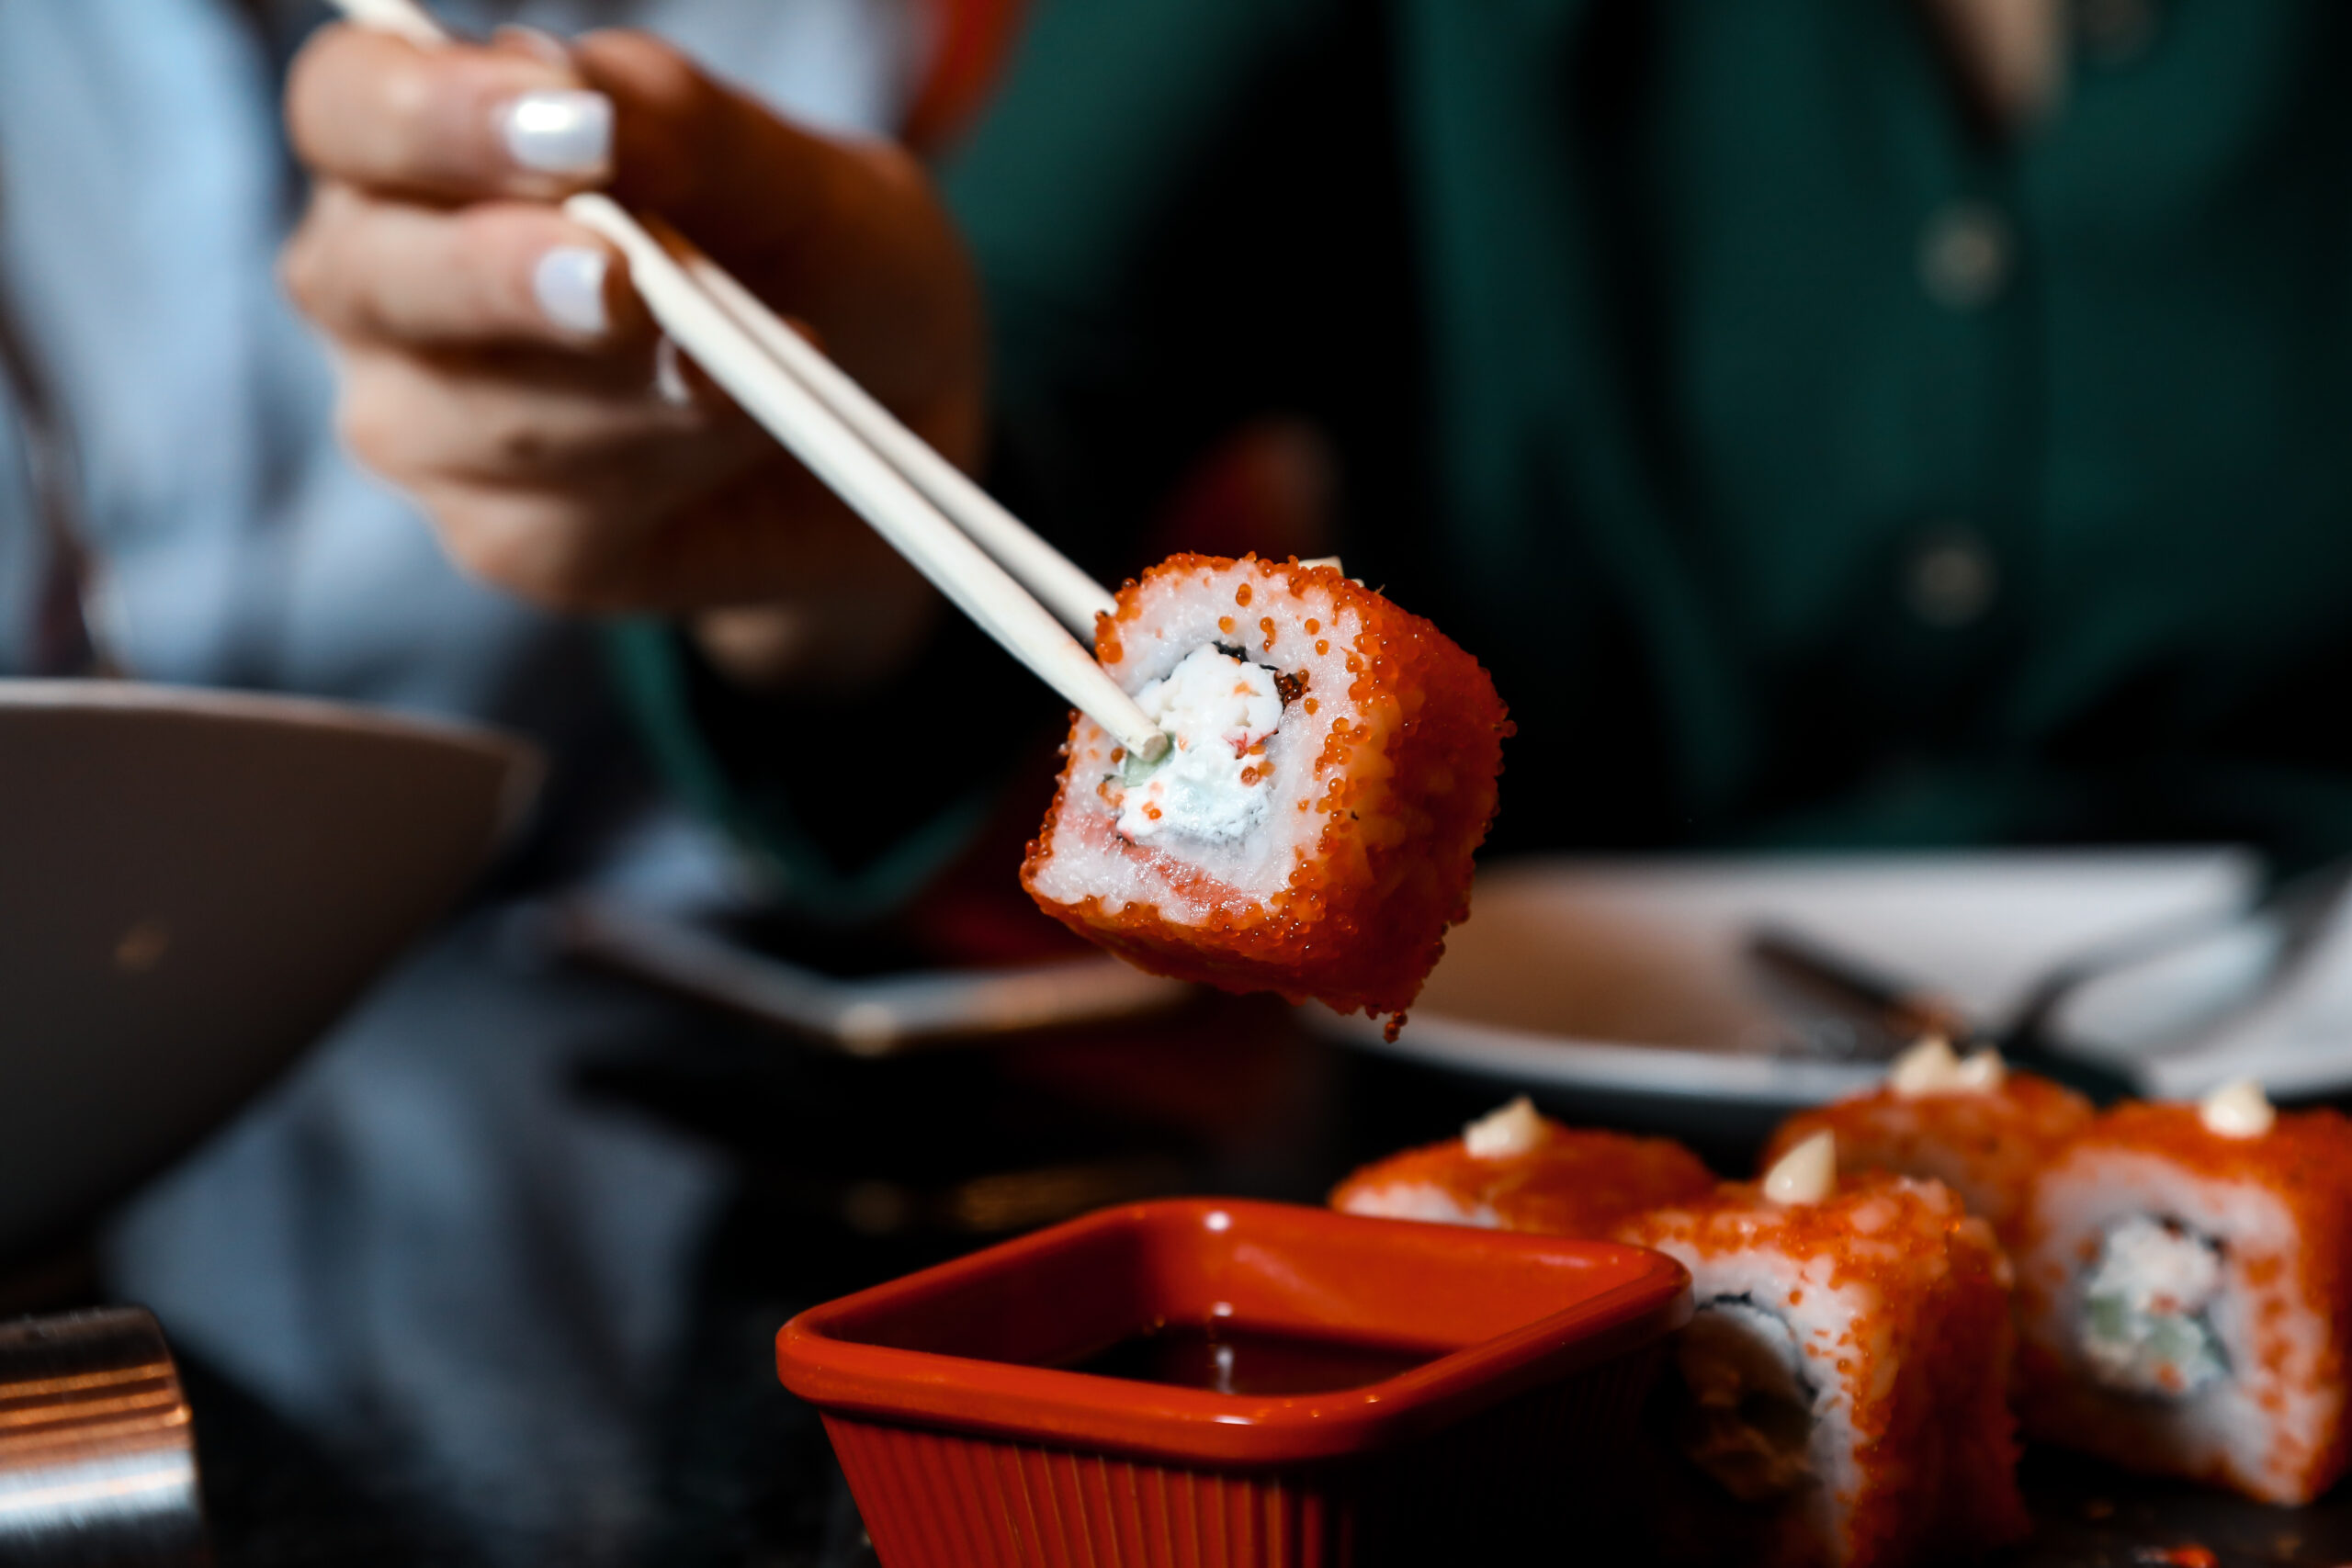 a person dips into a suace sushi rolls while using sticks close-up view